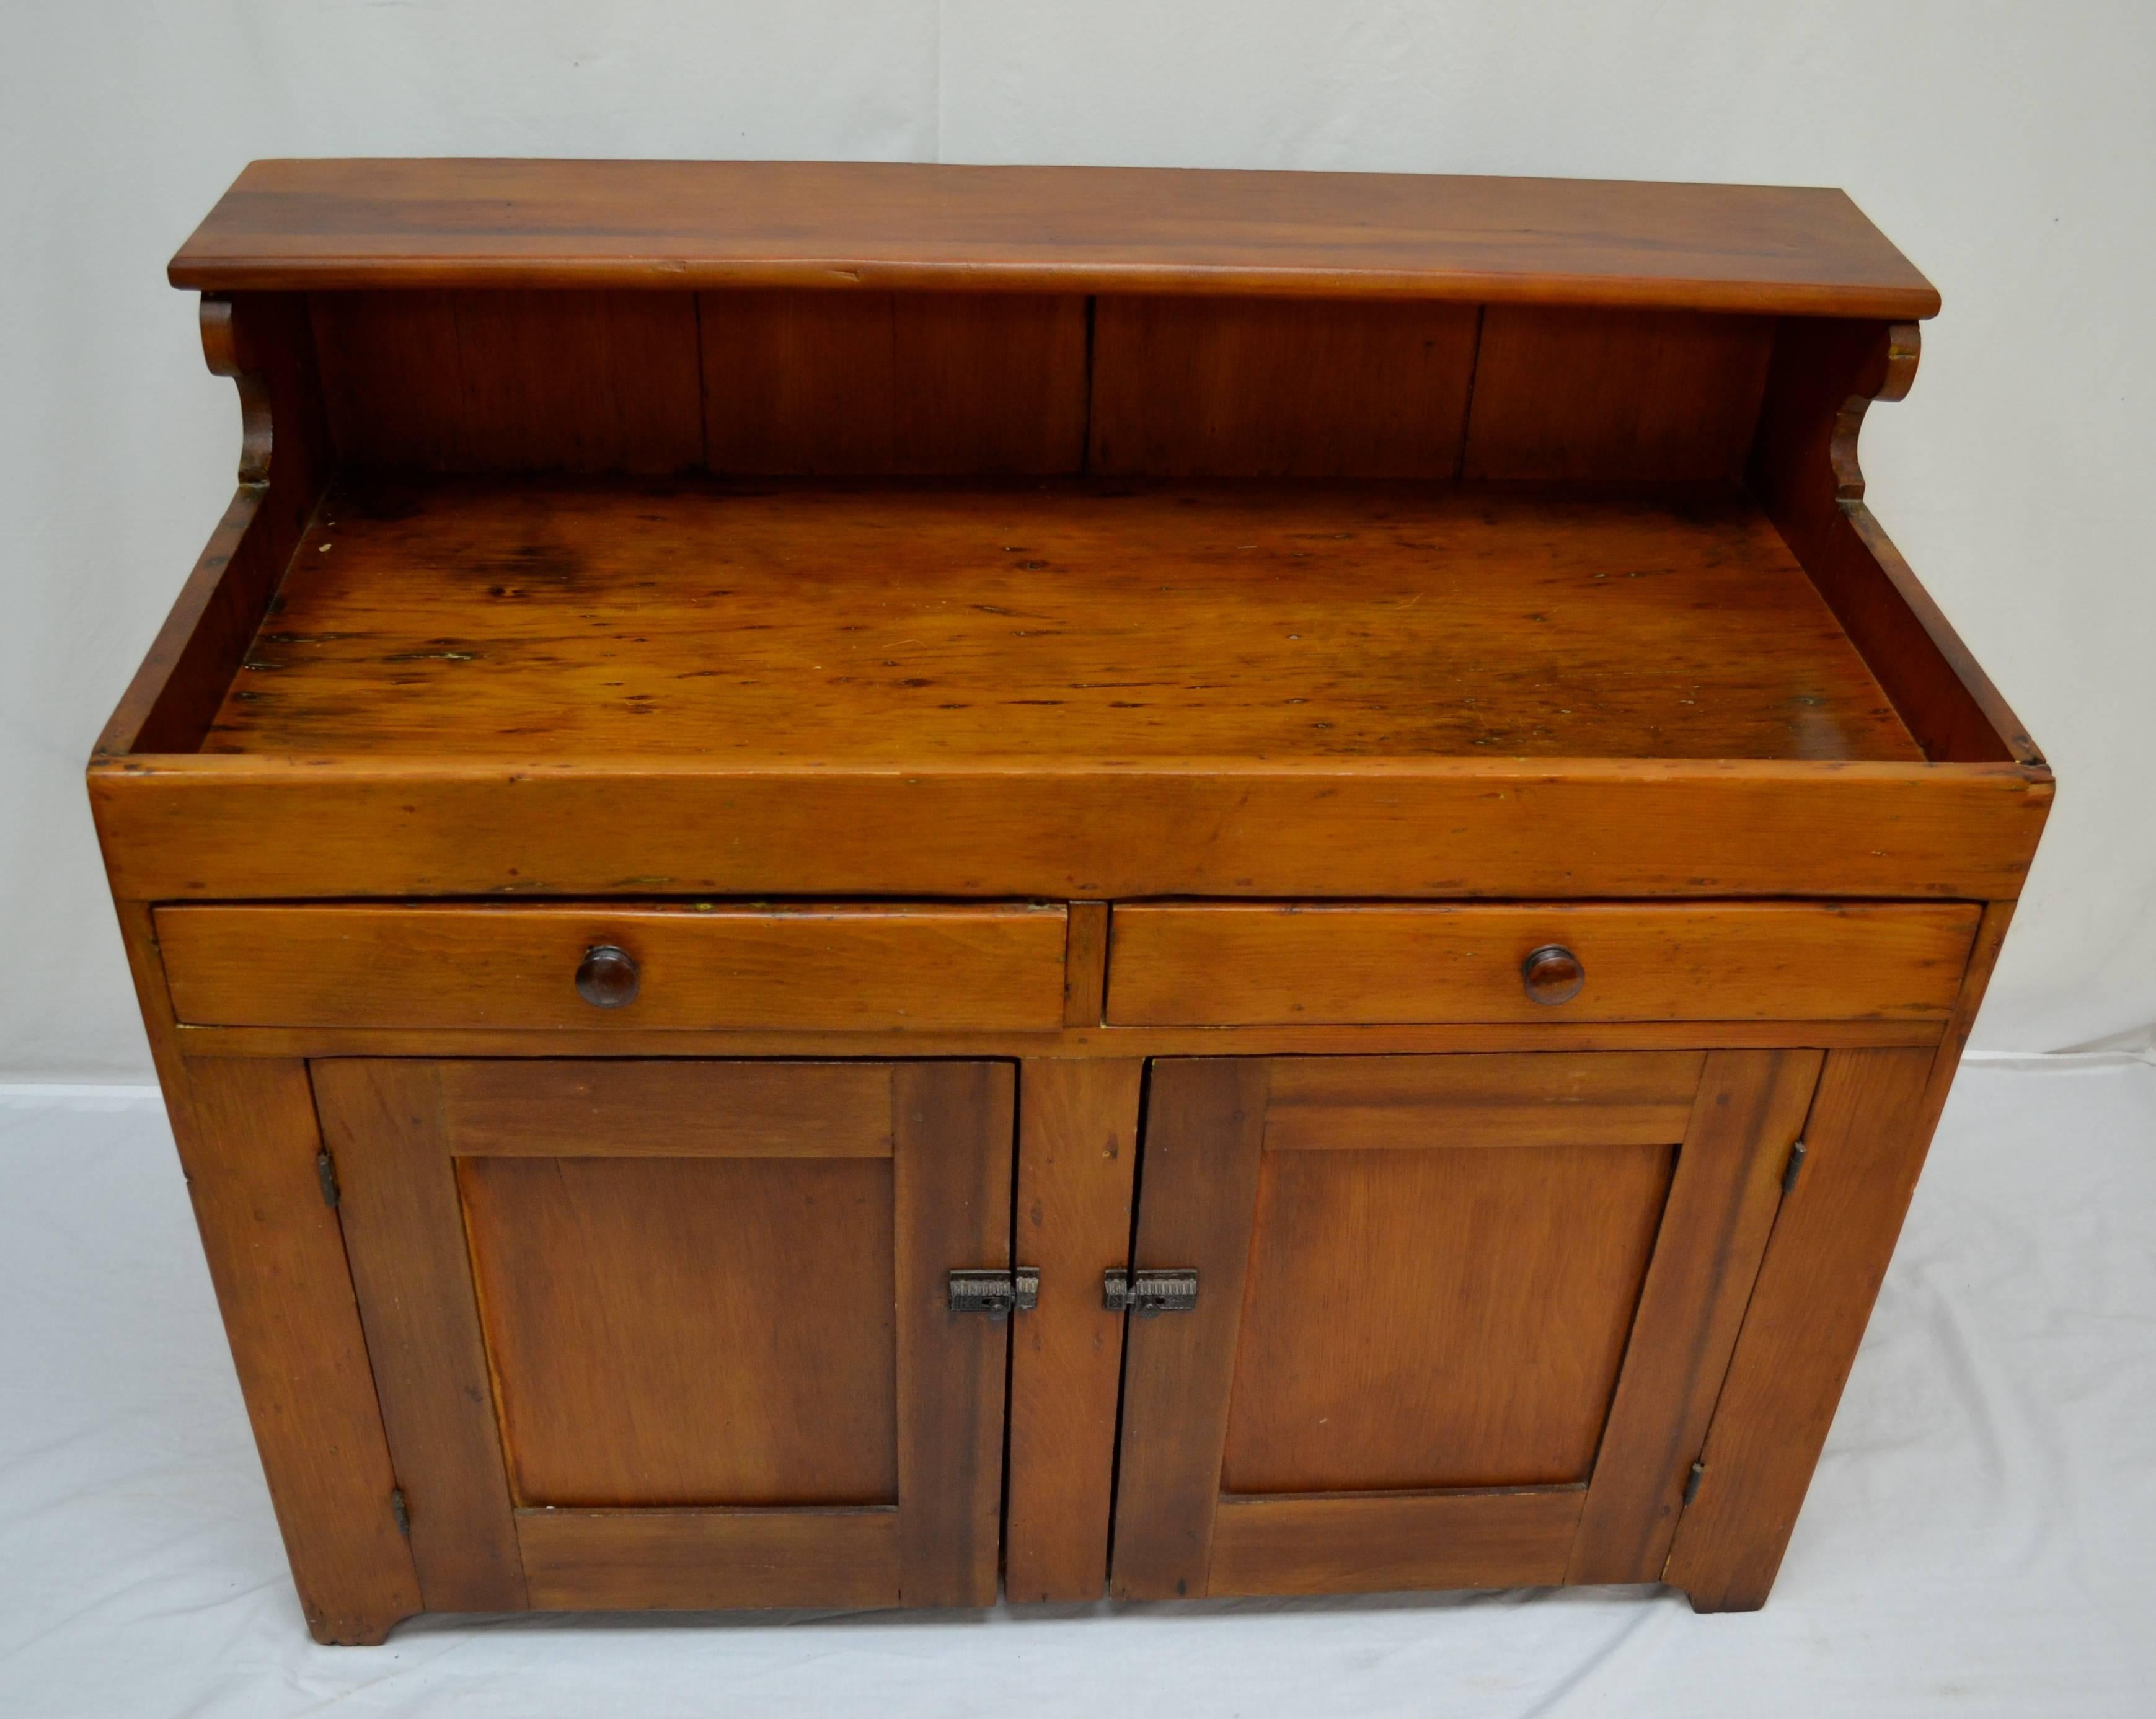 This is a small and well-used dry sink with two lap-jointed drawers and two flat panelled doors with original spring-loaded catches (slightly re-aligned), closing onto a central stile. The doors open 180 degrees, giving easy access to the generous